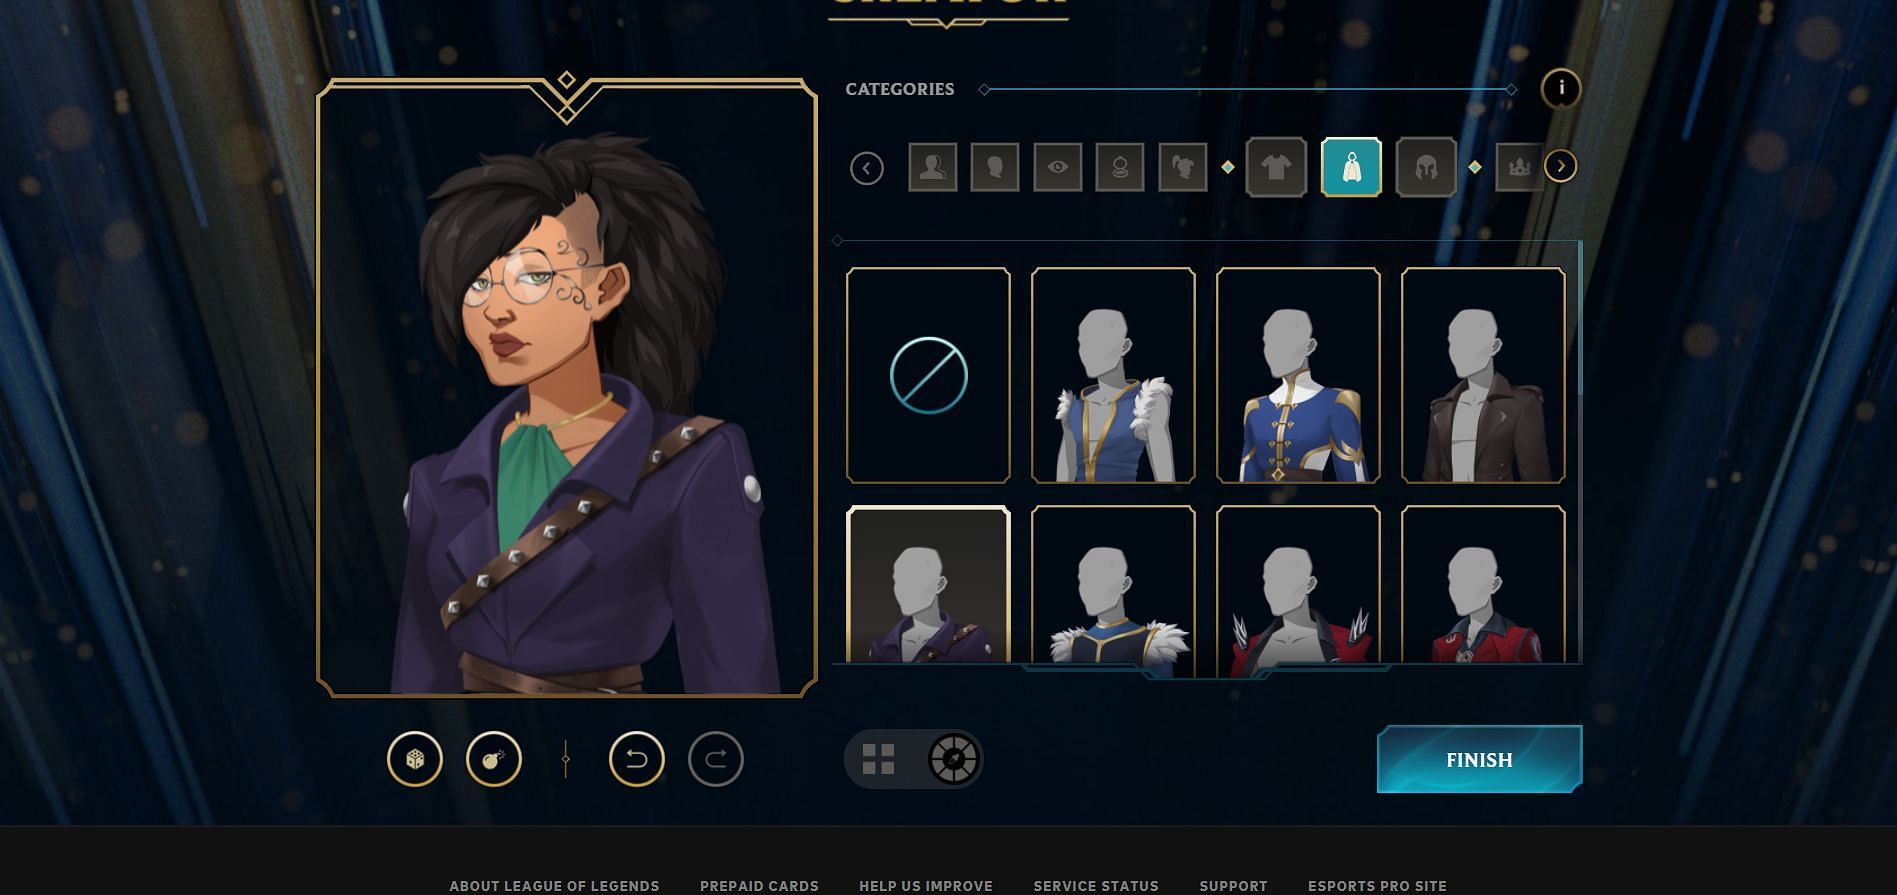 League of Legends' new Avatar Creator: Release date and more